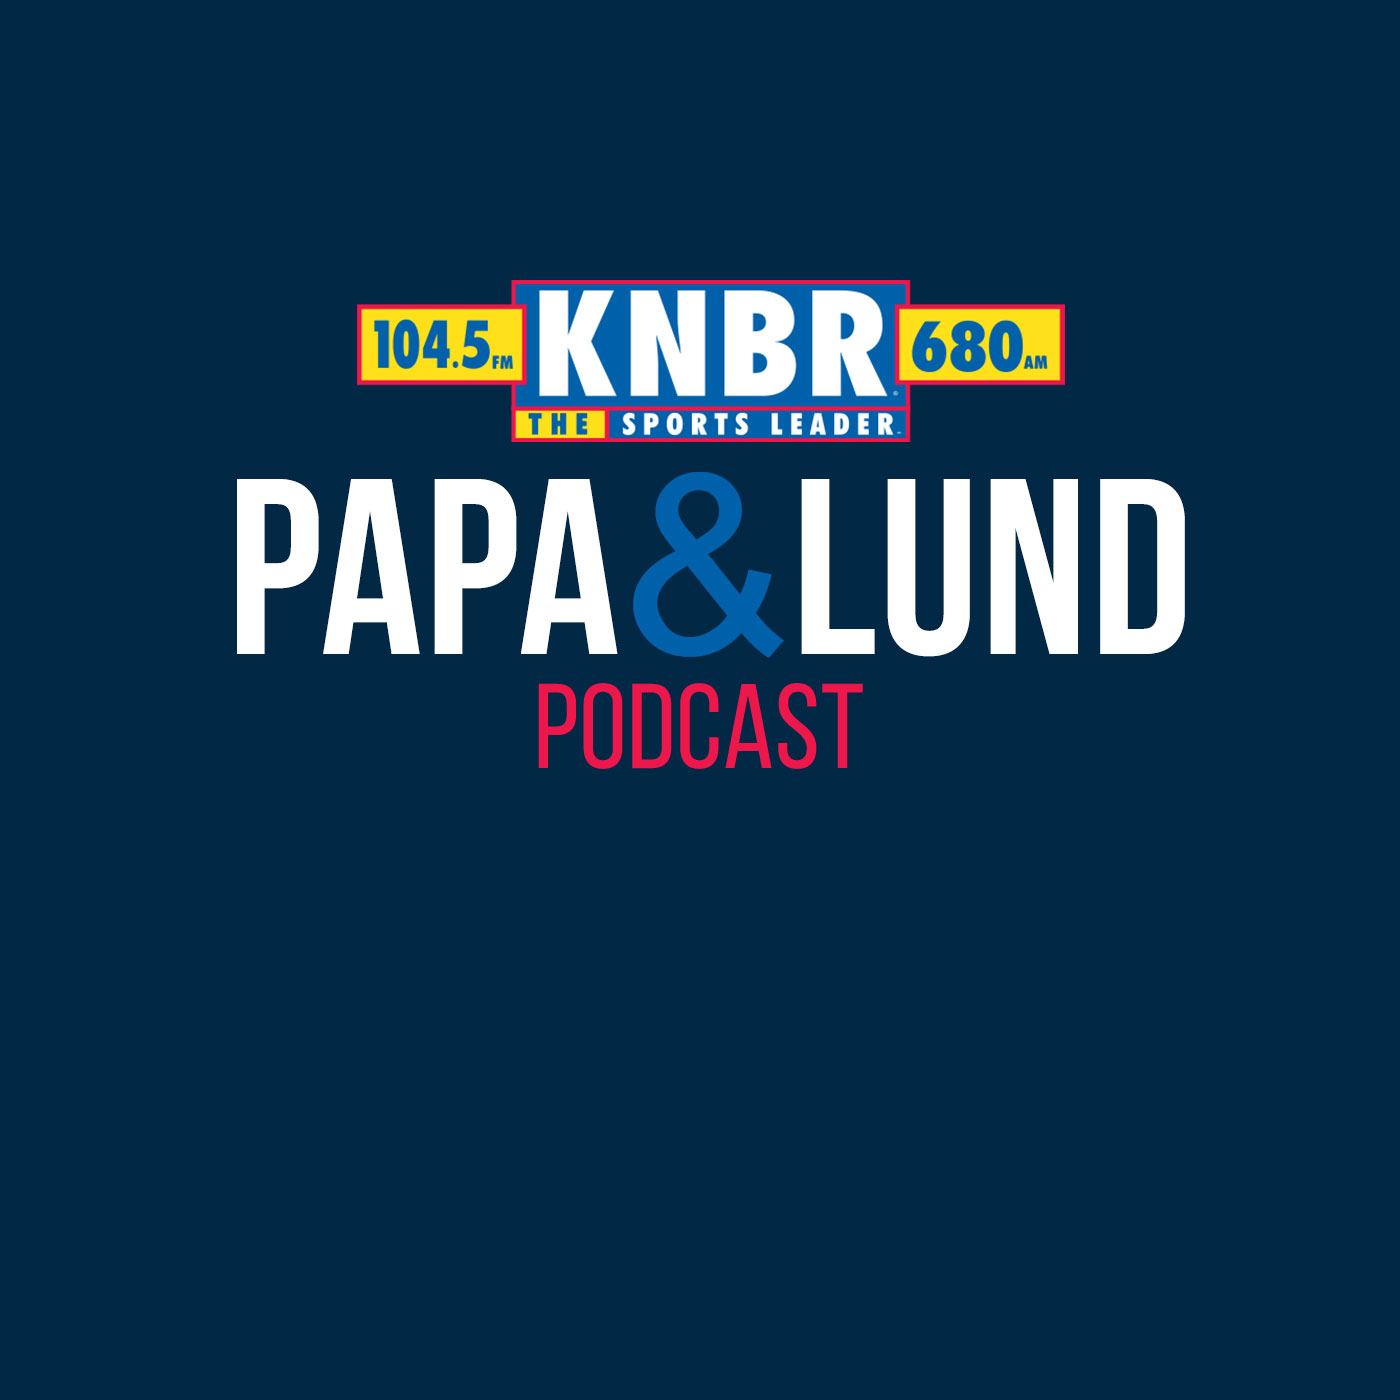 6-19 Jon Miller joins Papa & Lund to discuss the huge 3 game sweep of the Dodgers in LA and how the club is playing their best baseball into a critical homestand